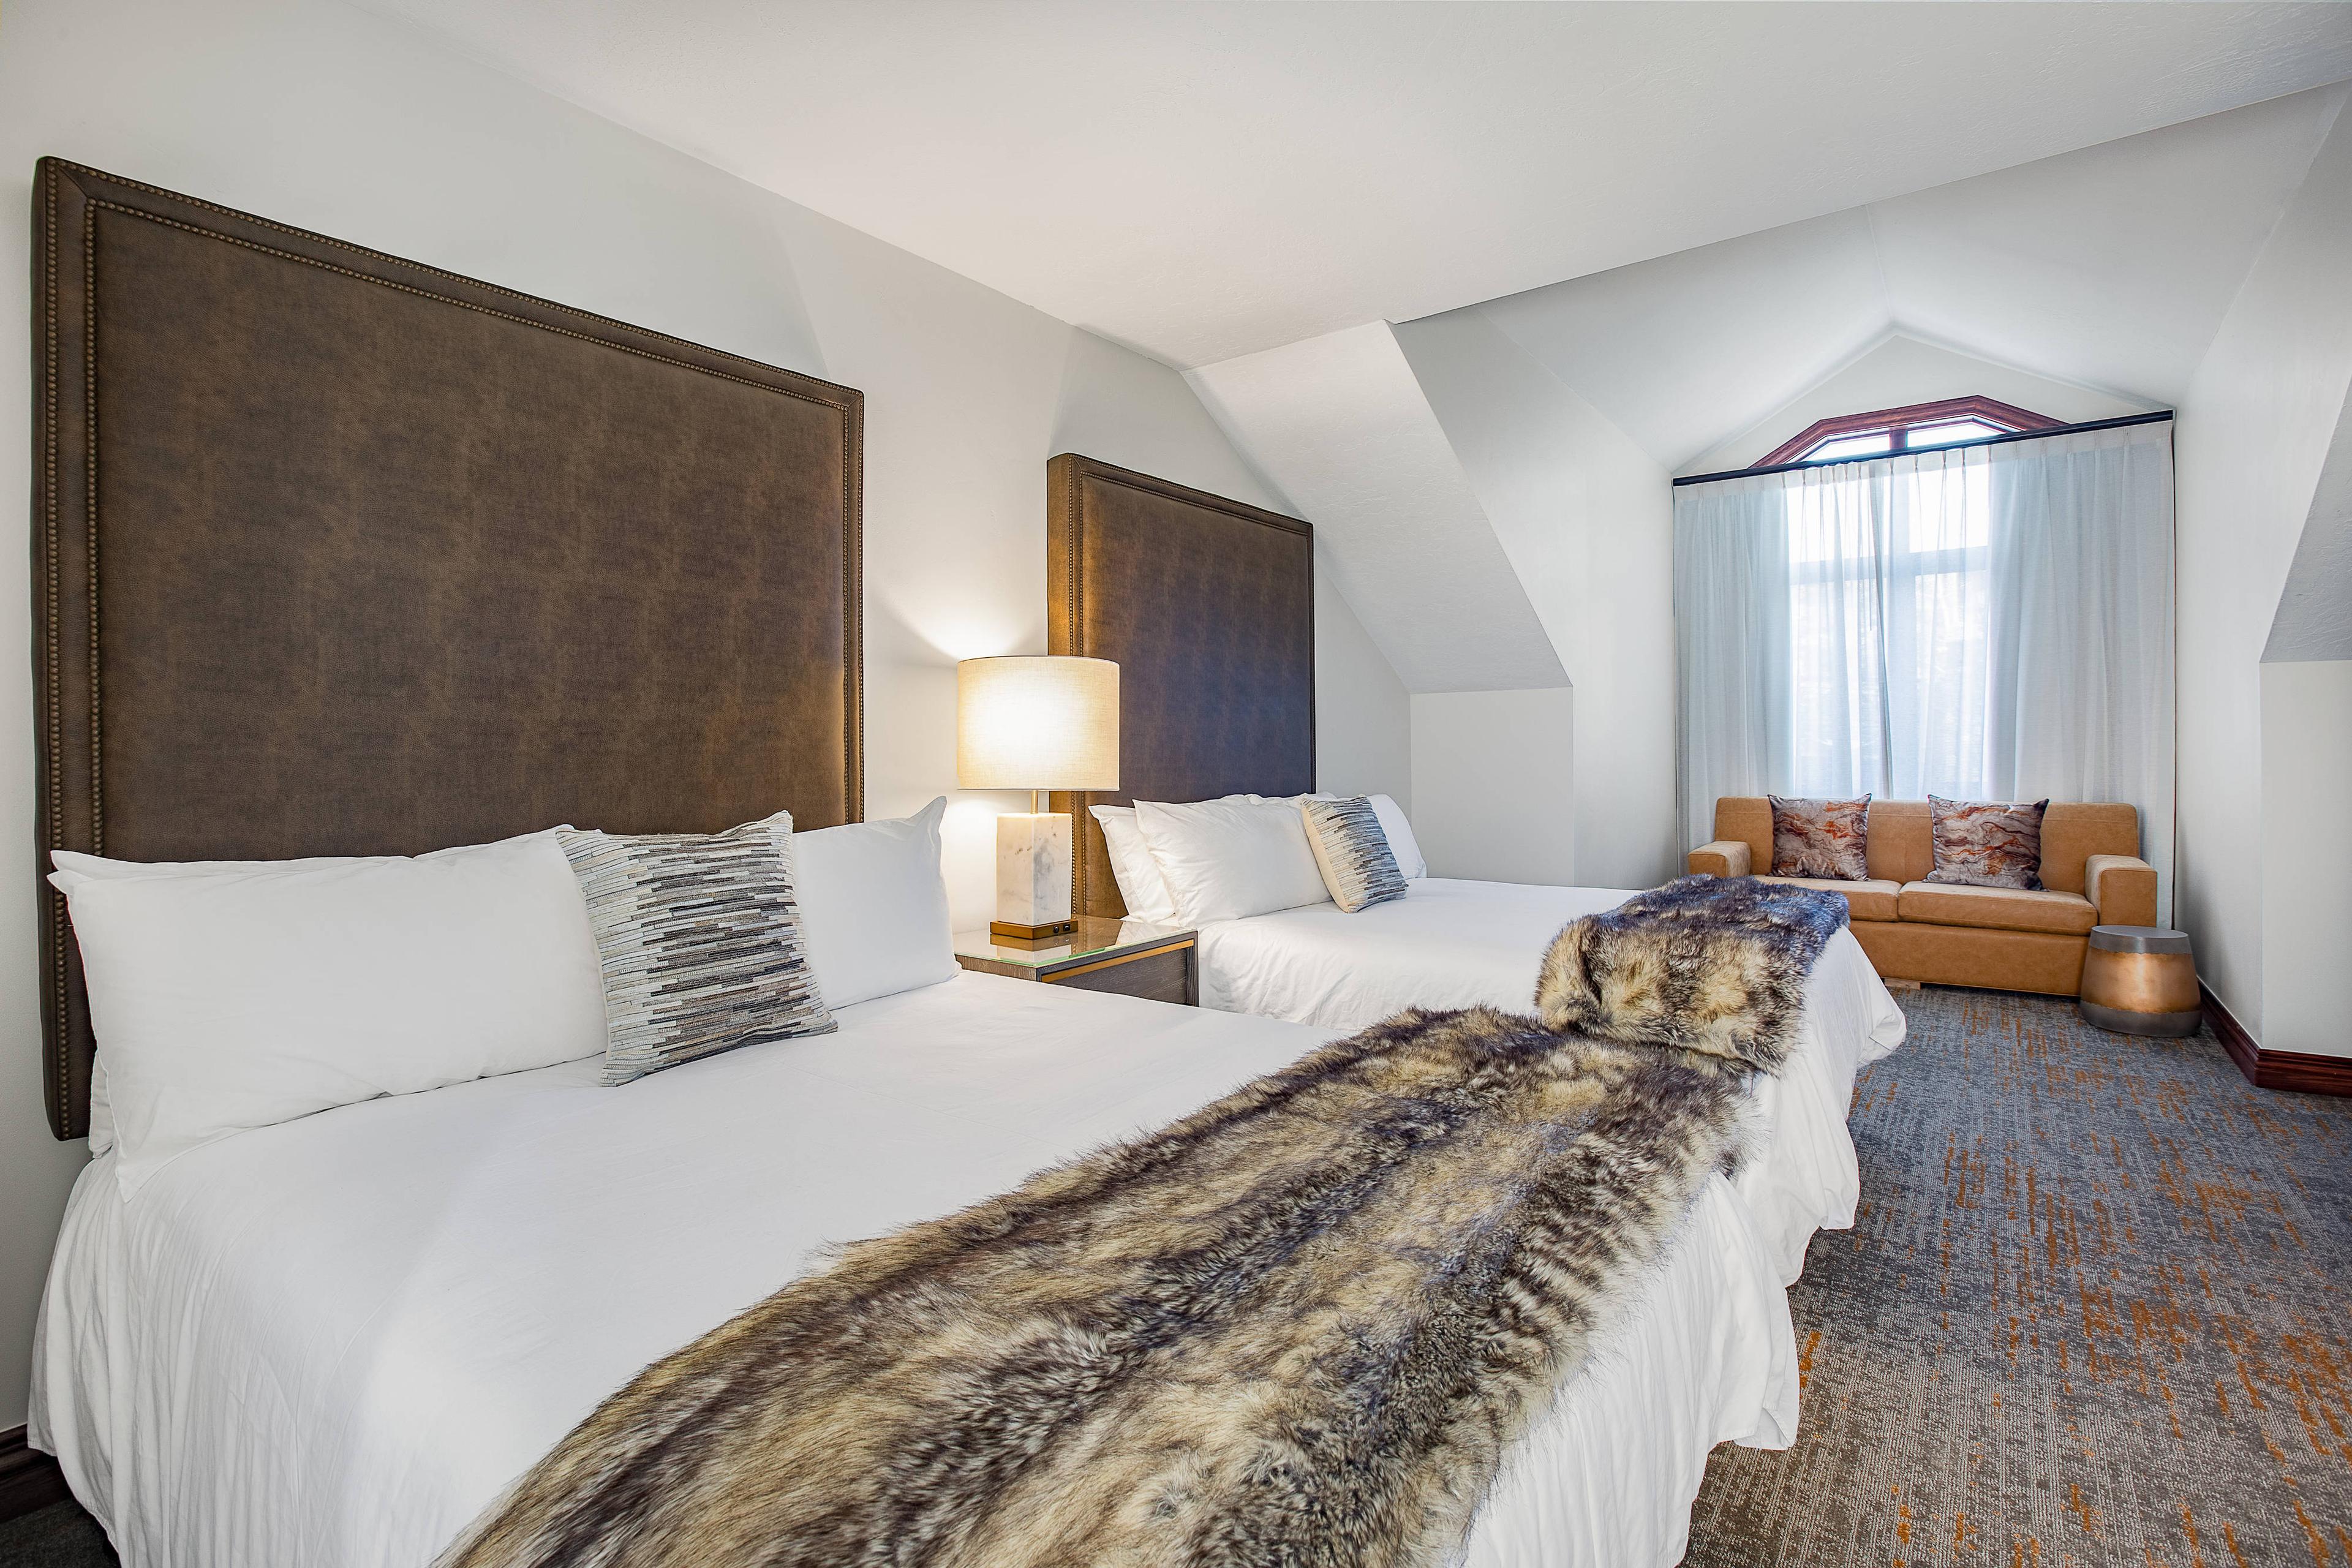 Wrap yourself in a faux fur throw and enjoy the luxurious accommodations in our spacious suite with two separate rooms.